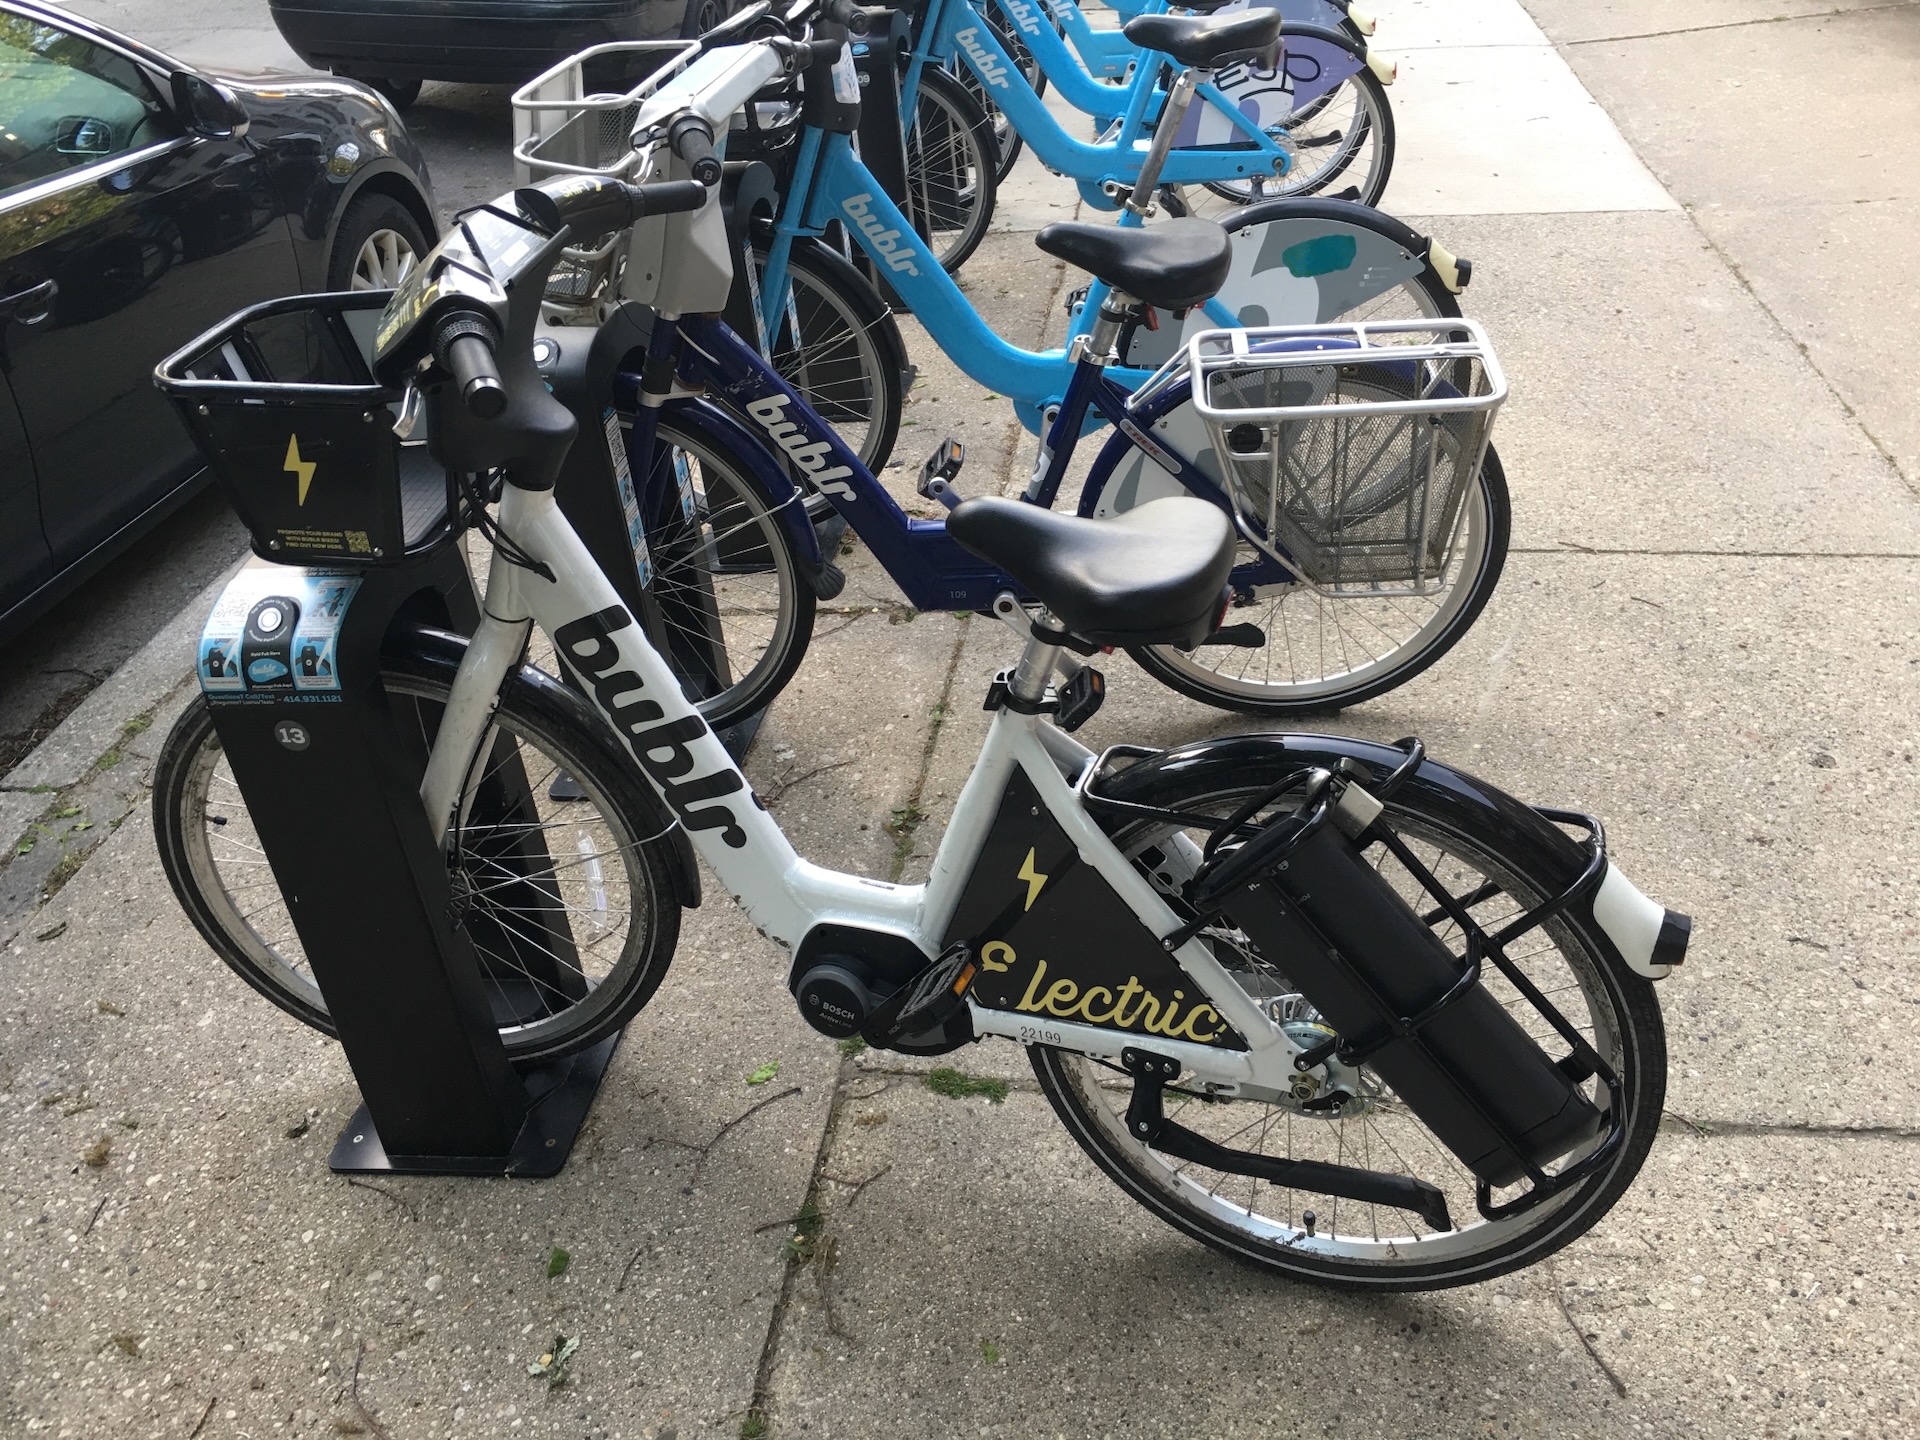 Bublr Ride-Share Bicycles